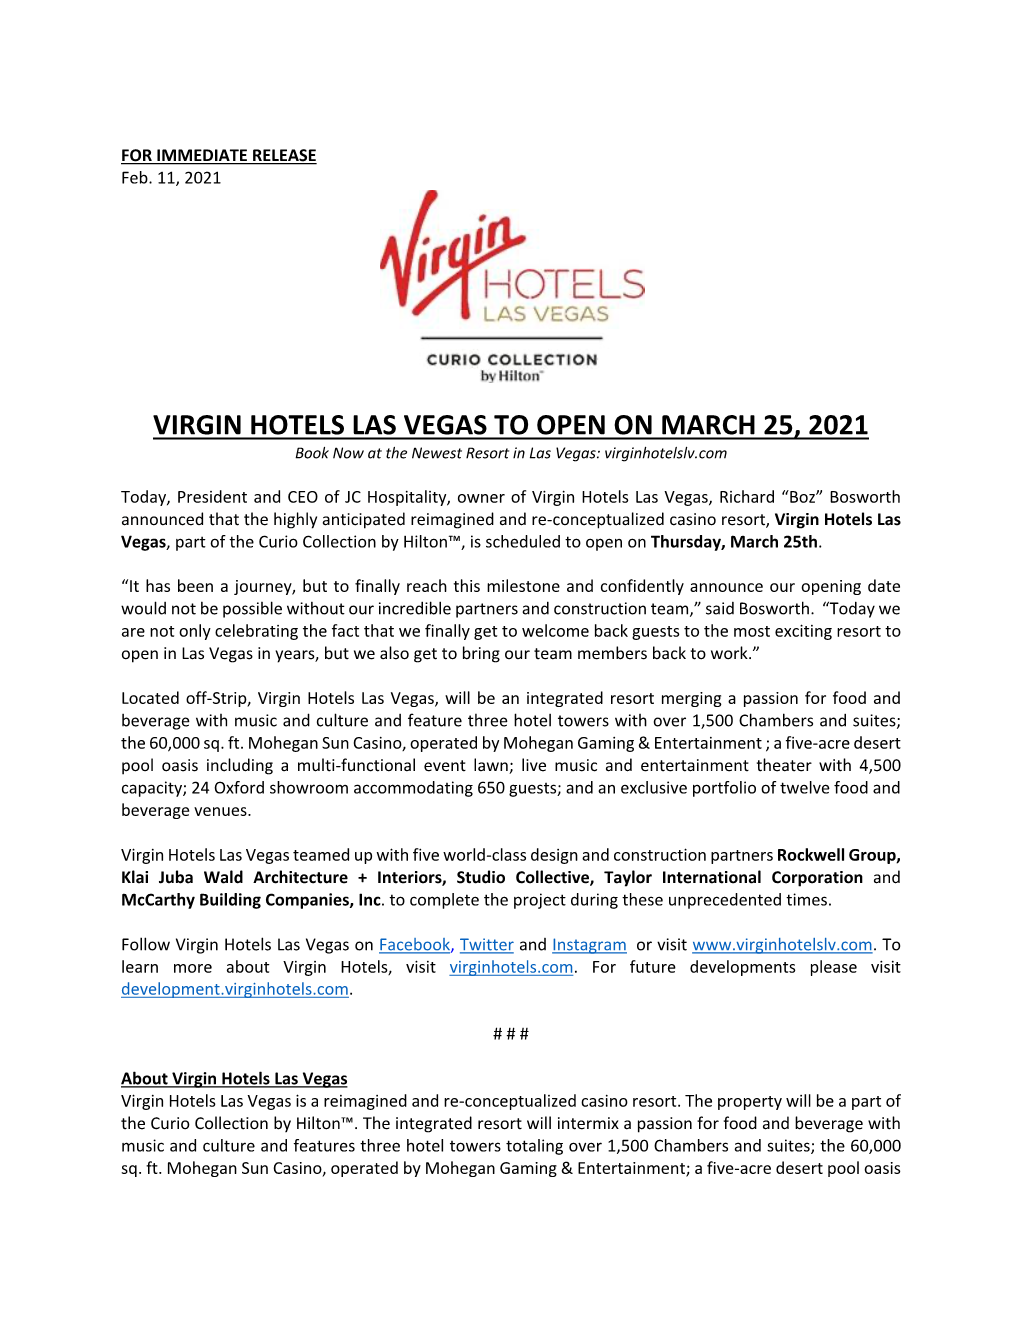 VIRGIN HOTELS LAS VEGAS to OPEN on MARCH 25, 2021 Book Now at the Newest Resort in Las Vegas: Virginhotelslv.Com